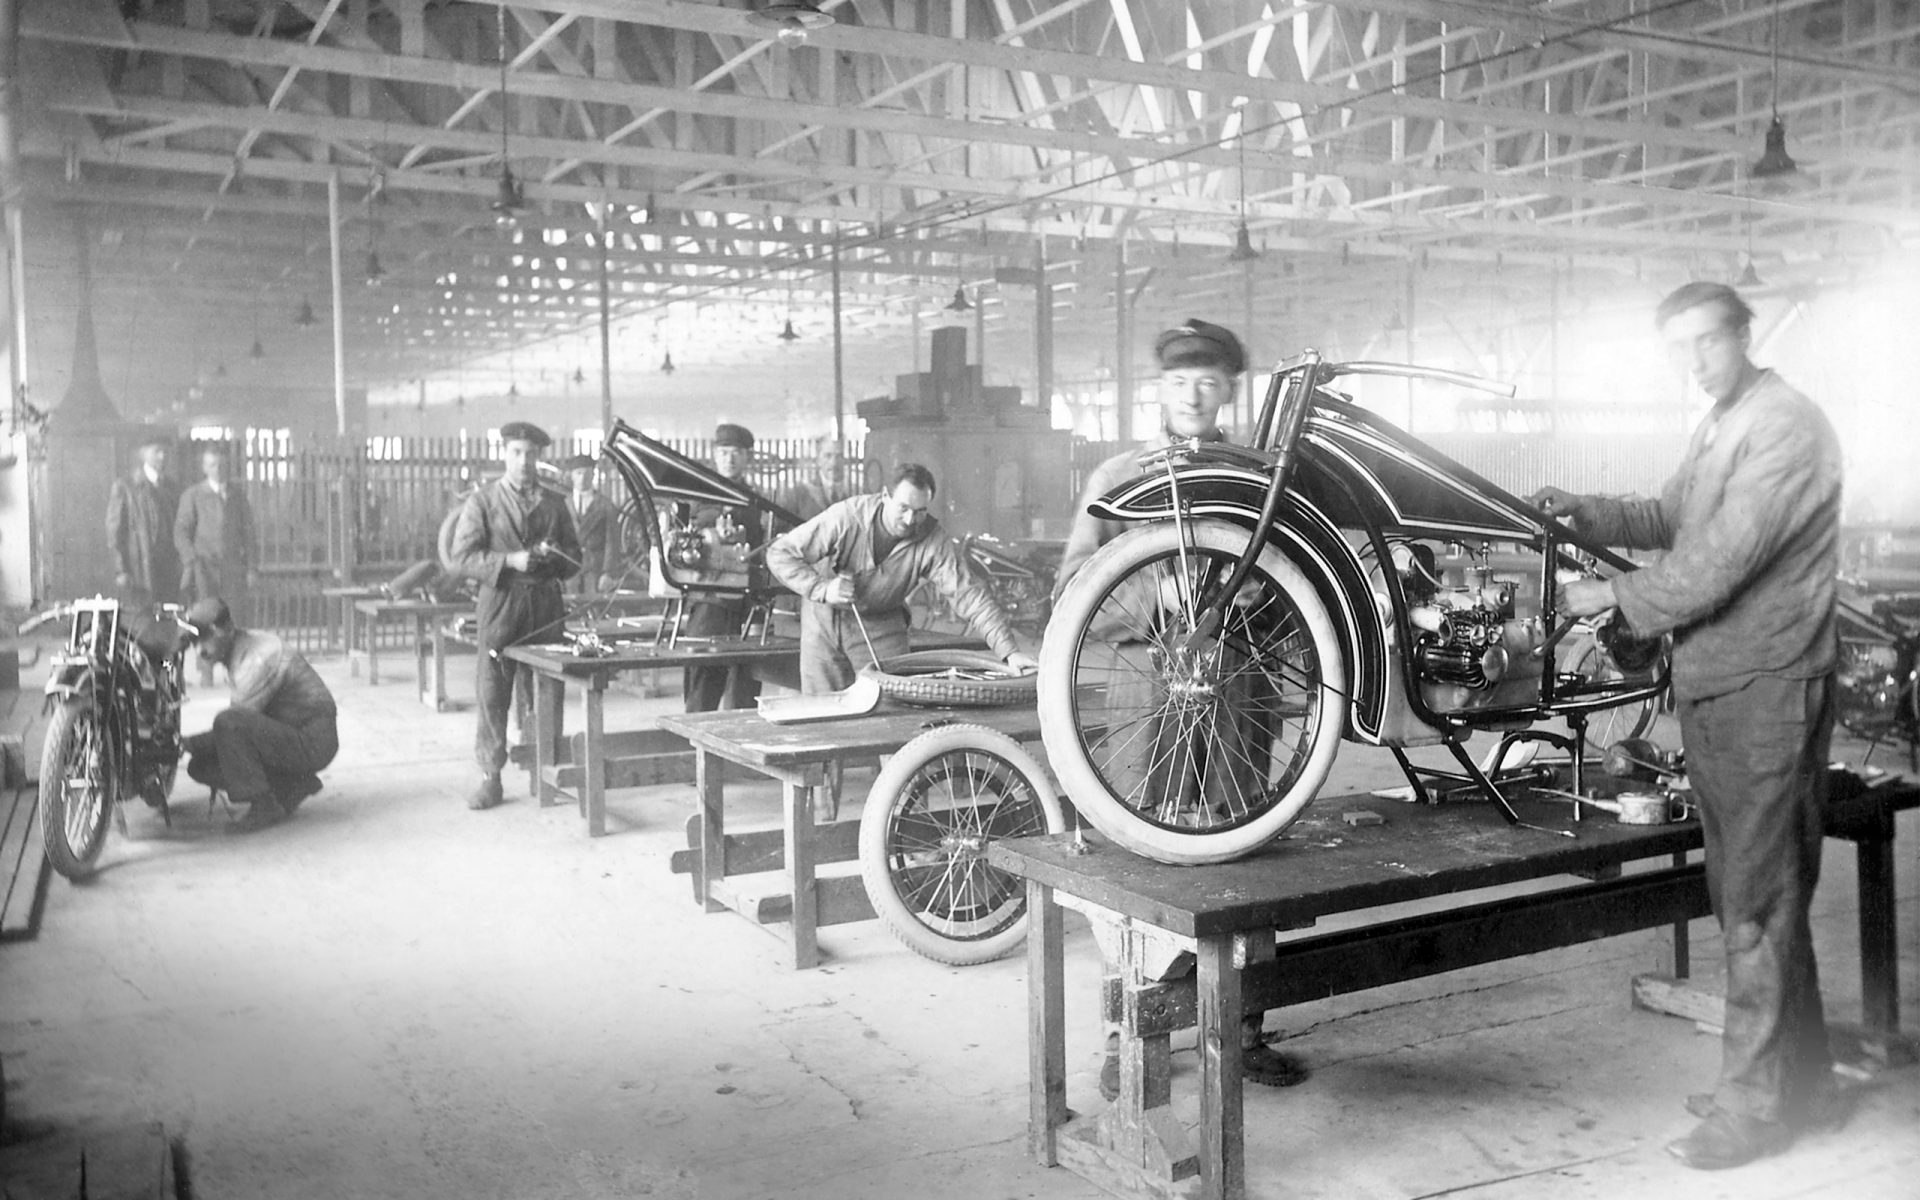 Snapshot showing production of the first BMW motorcycle in 1923.